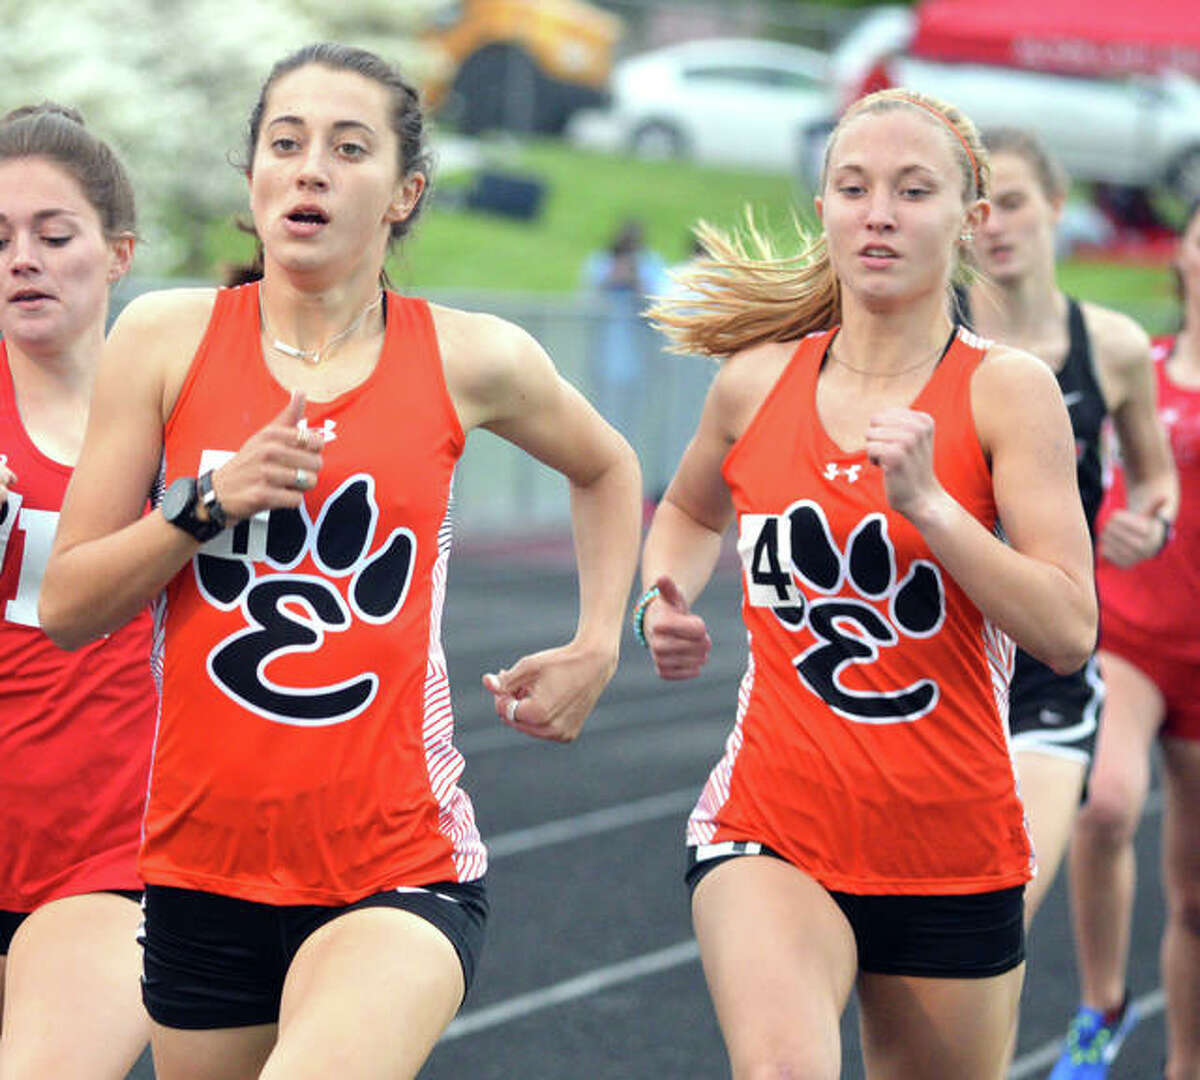 Edwardsville’s Maddie Miller earned All-SWC third-team honors for the 800-meter run in girls track after her third-place finish at the league meet.